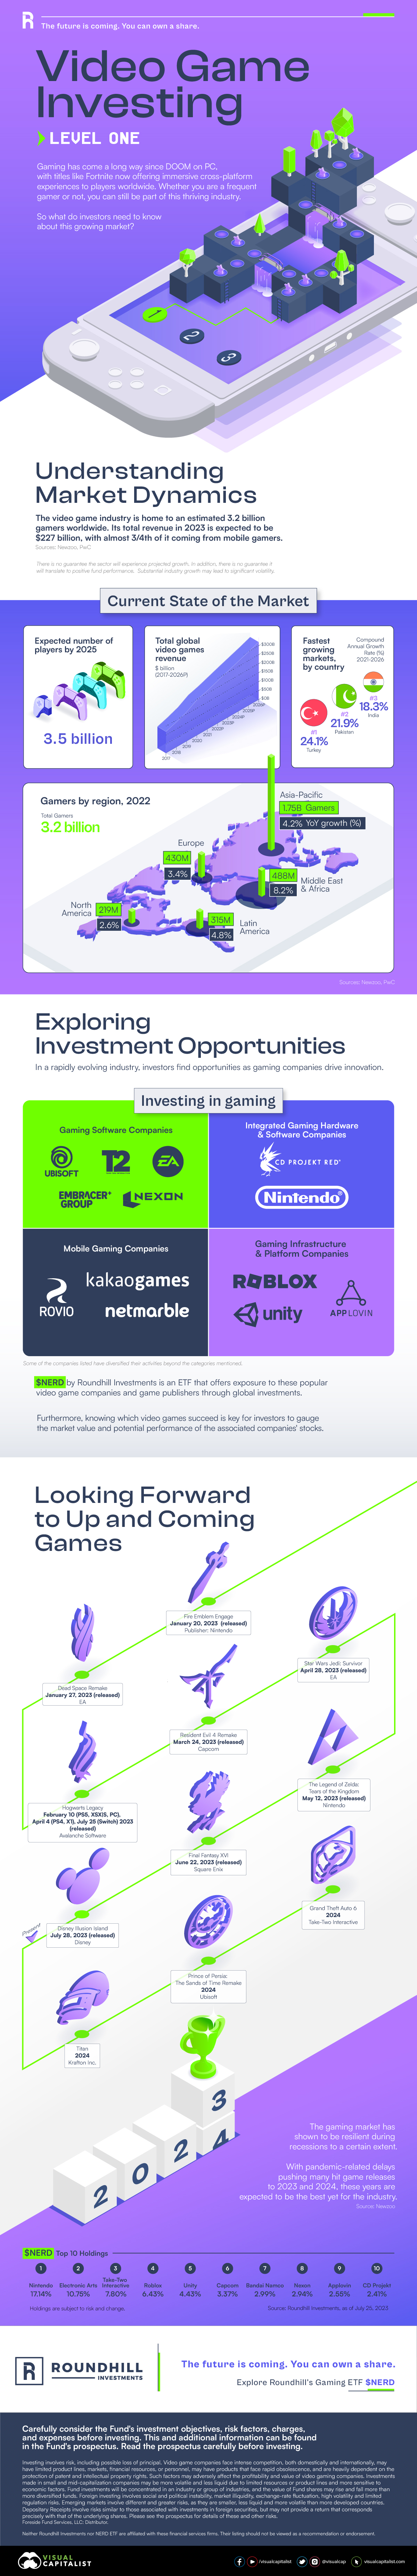 Video game industry for investors infographic